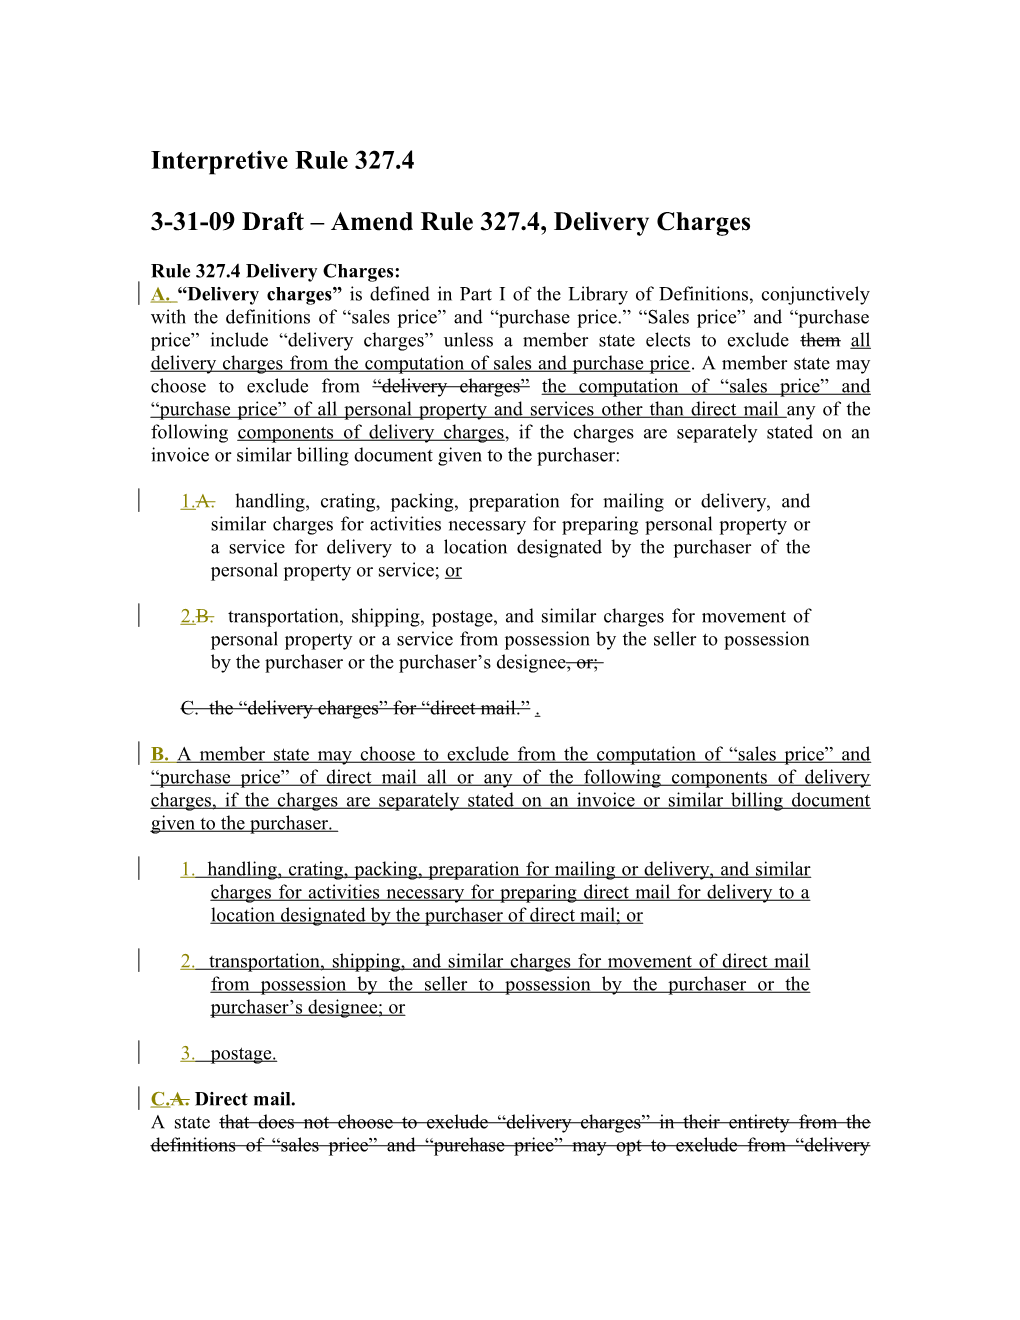 3-31-09 Draft Amend Rule 327.4, Delivery Charges